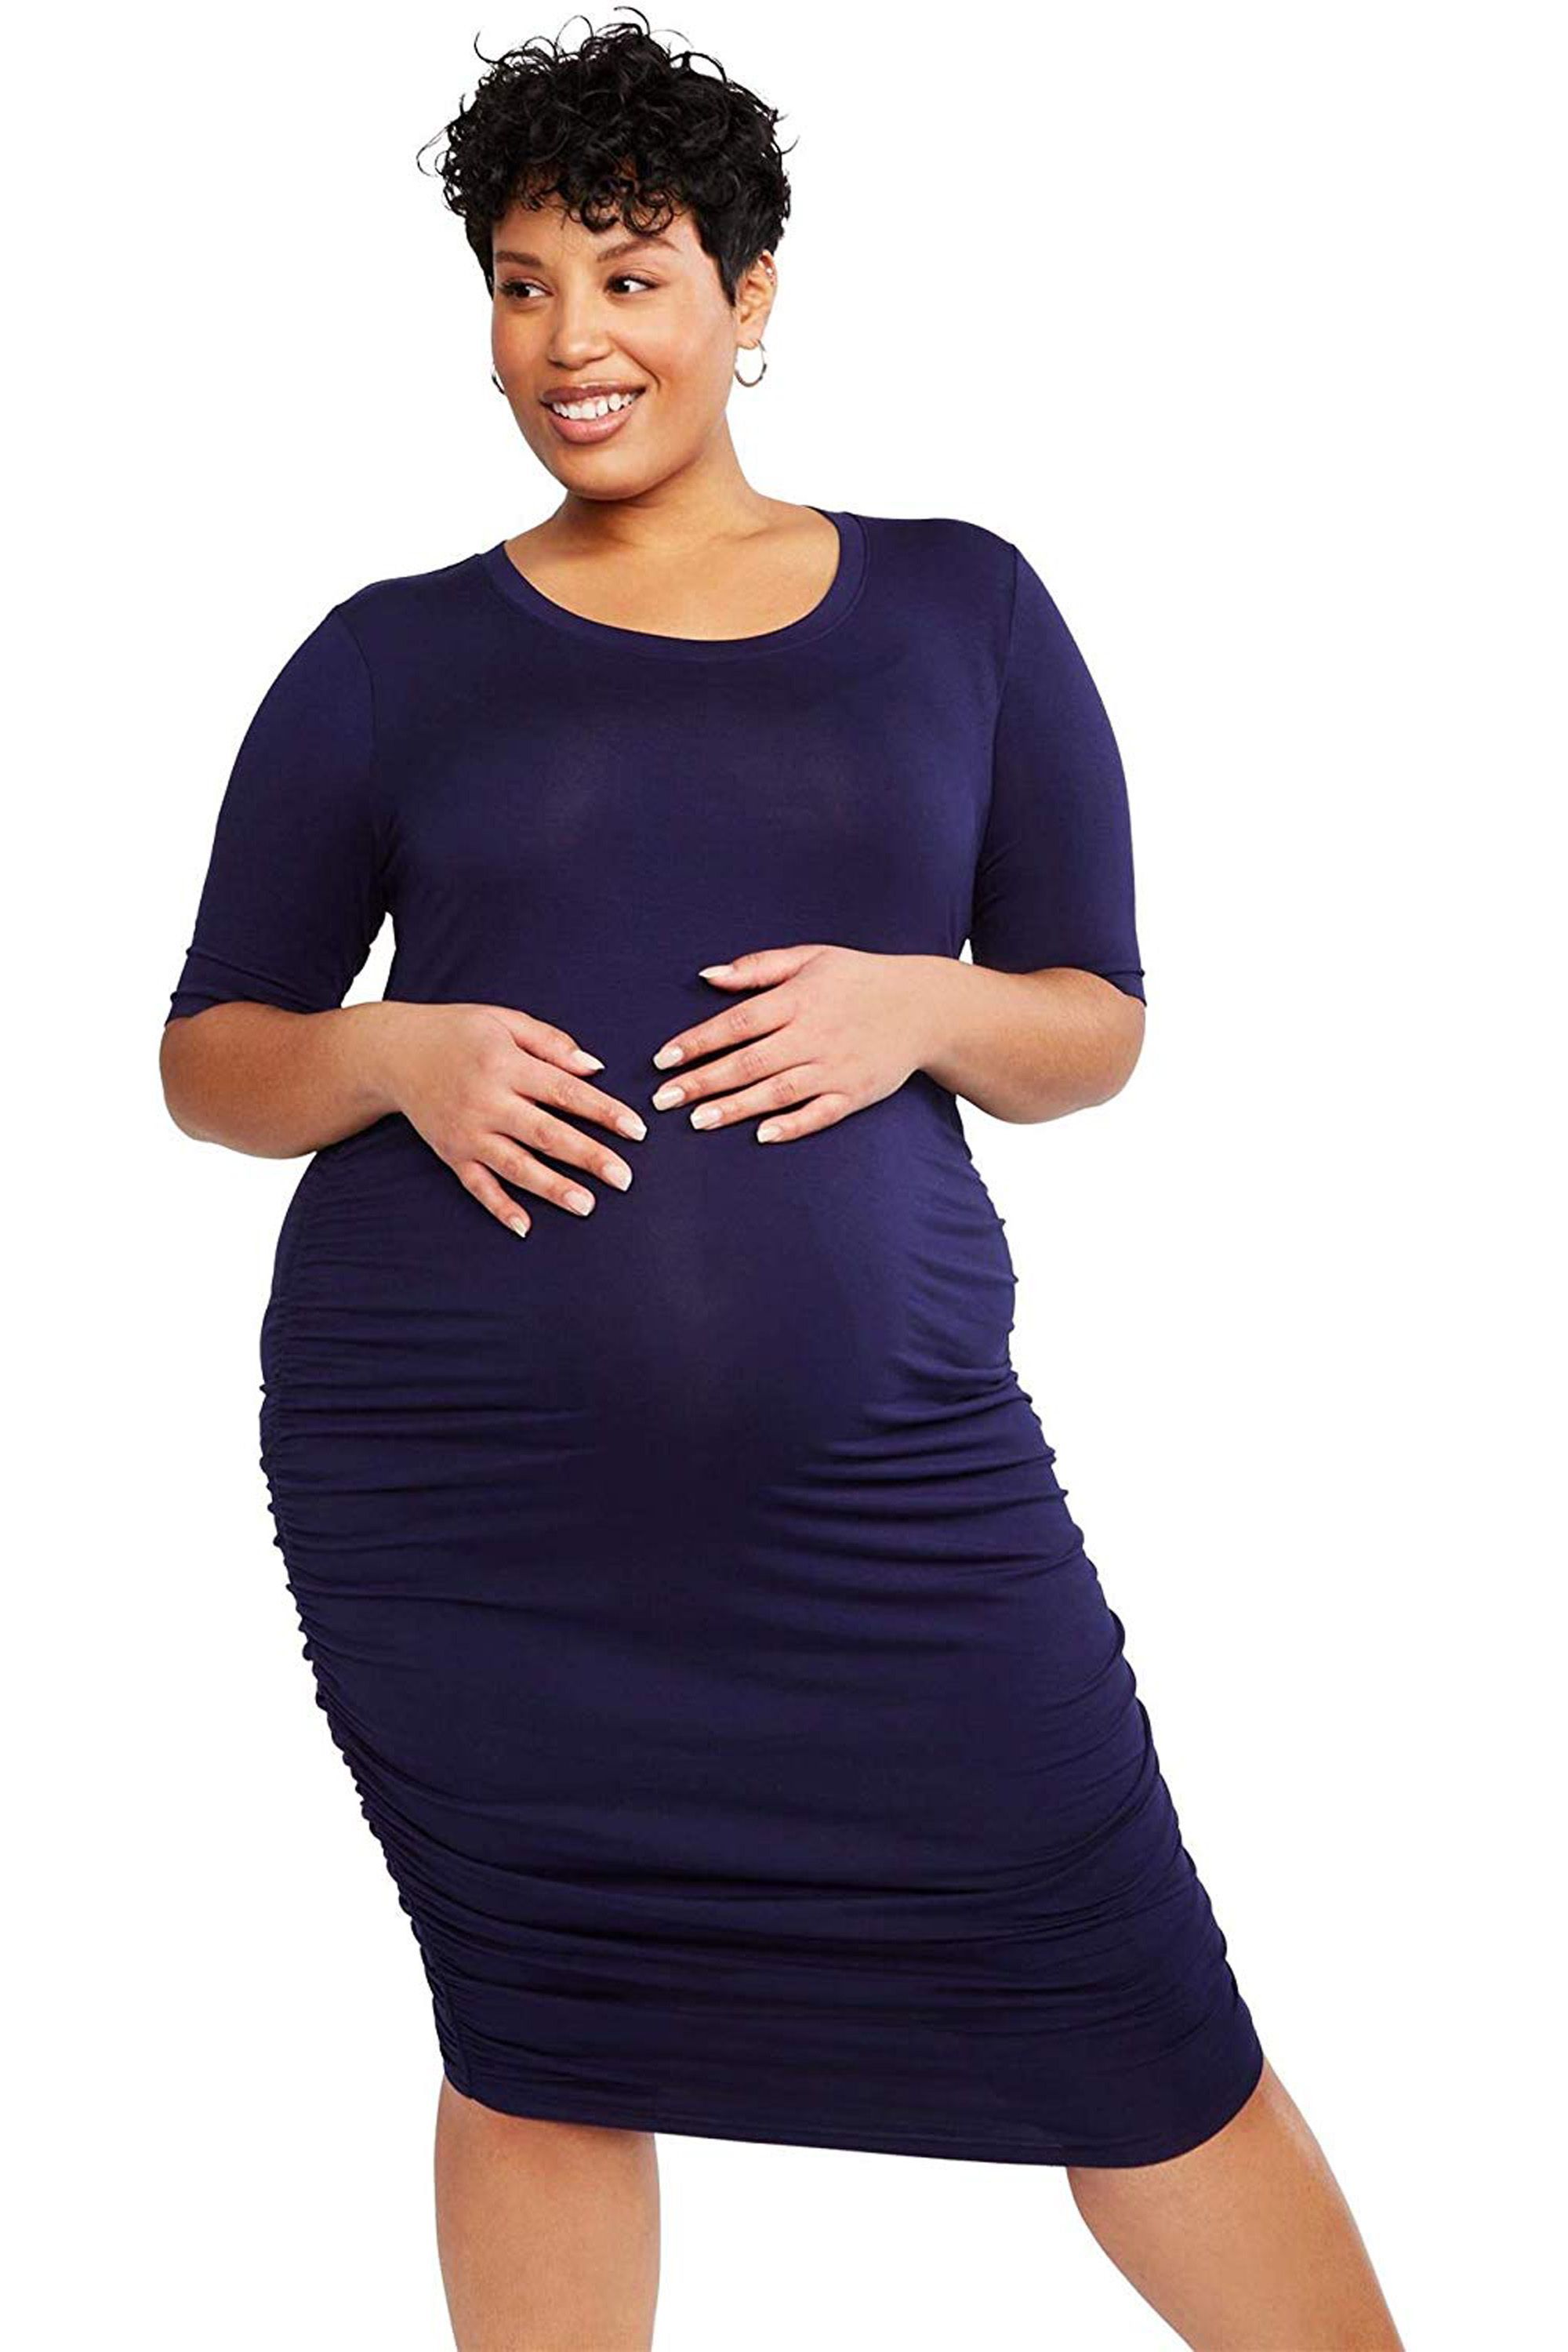 Women Maternity Tops Side Runched Long Sleeve Mock Collar Tunic Winter Maternity Shirts 